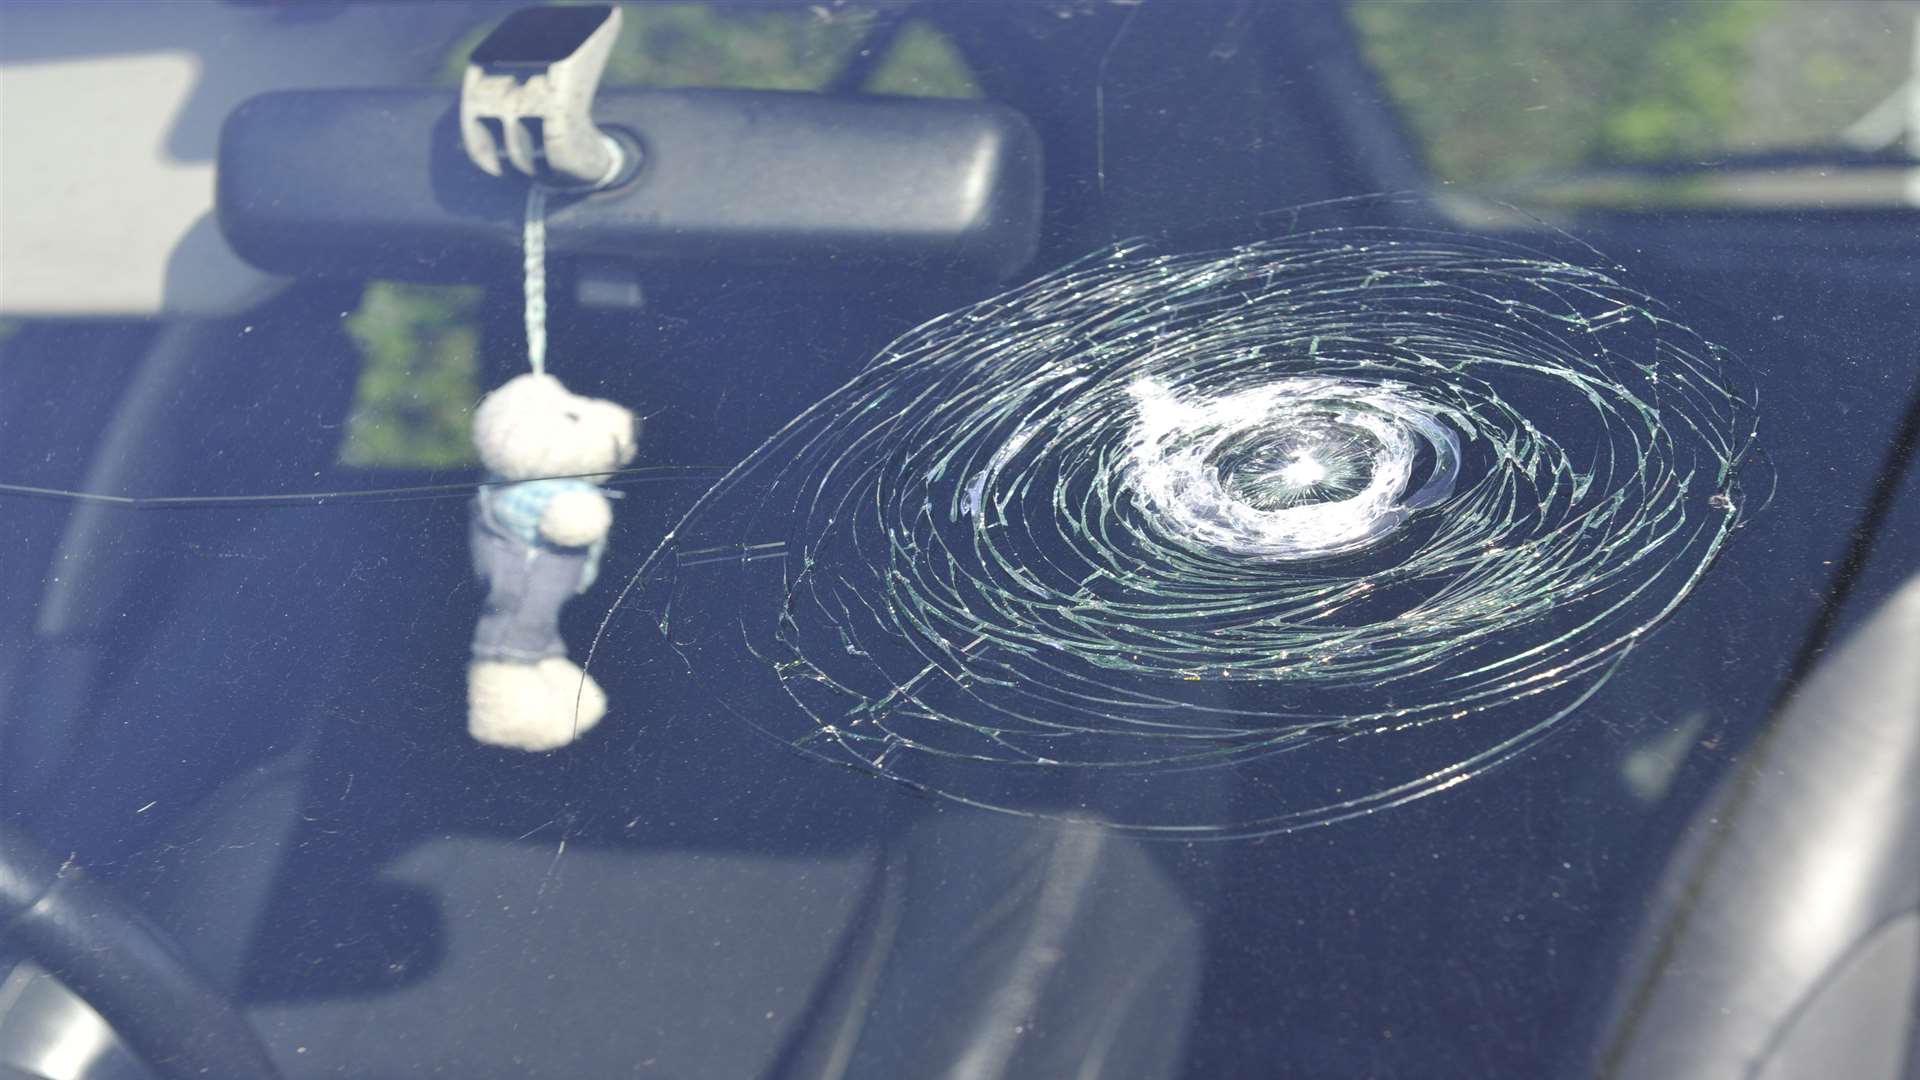 The damage done to the windscreen. Picture: Tony Flashman